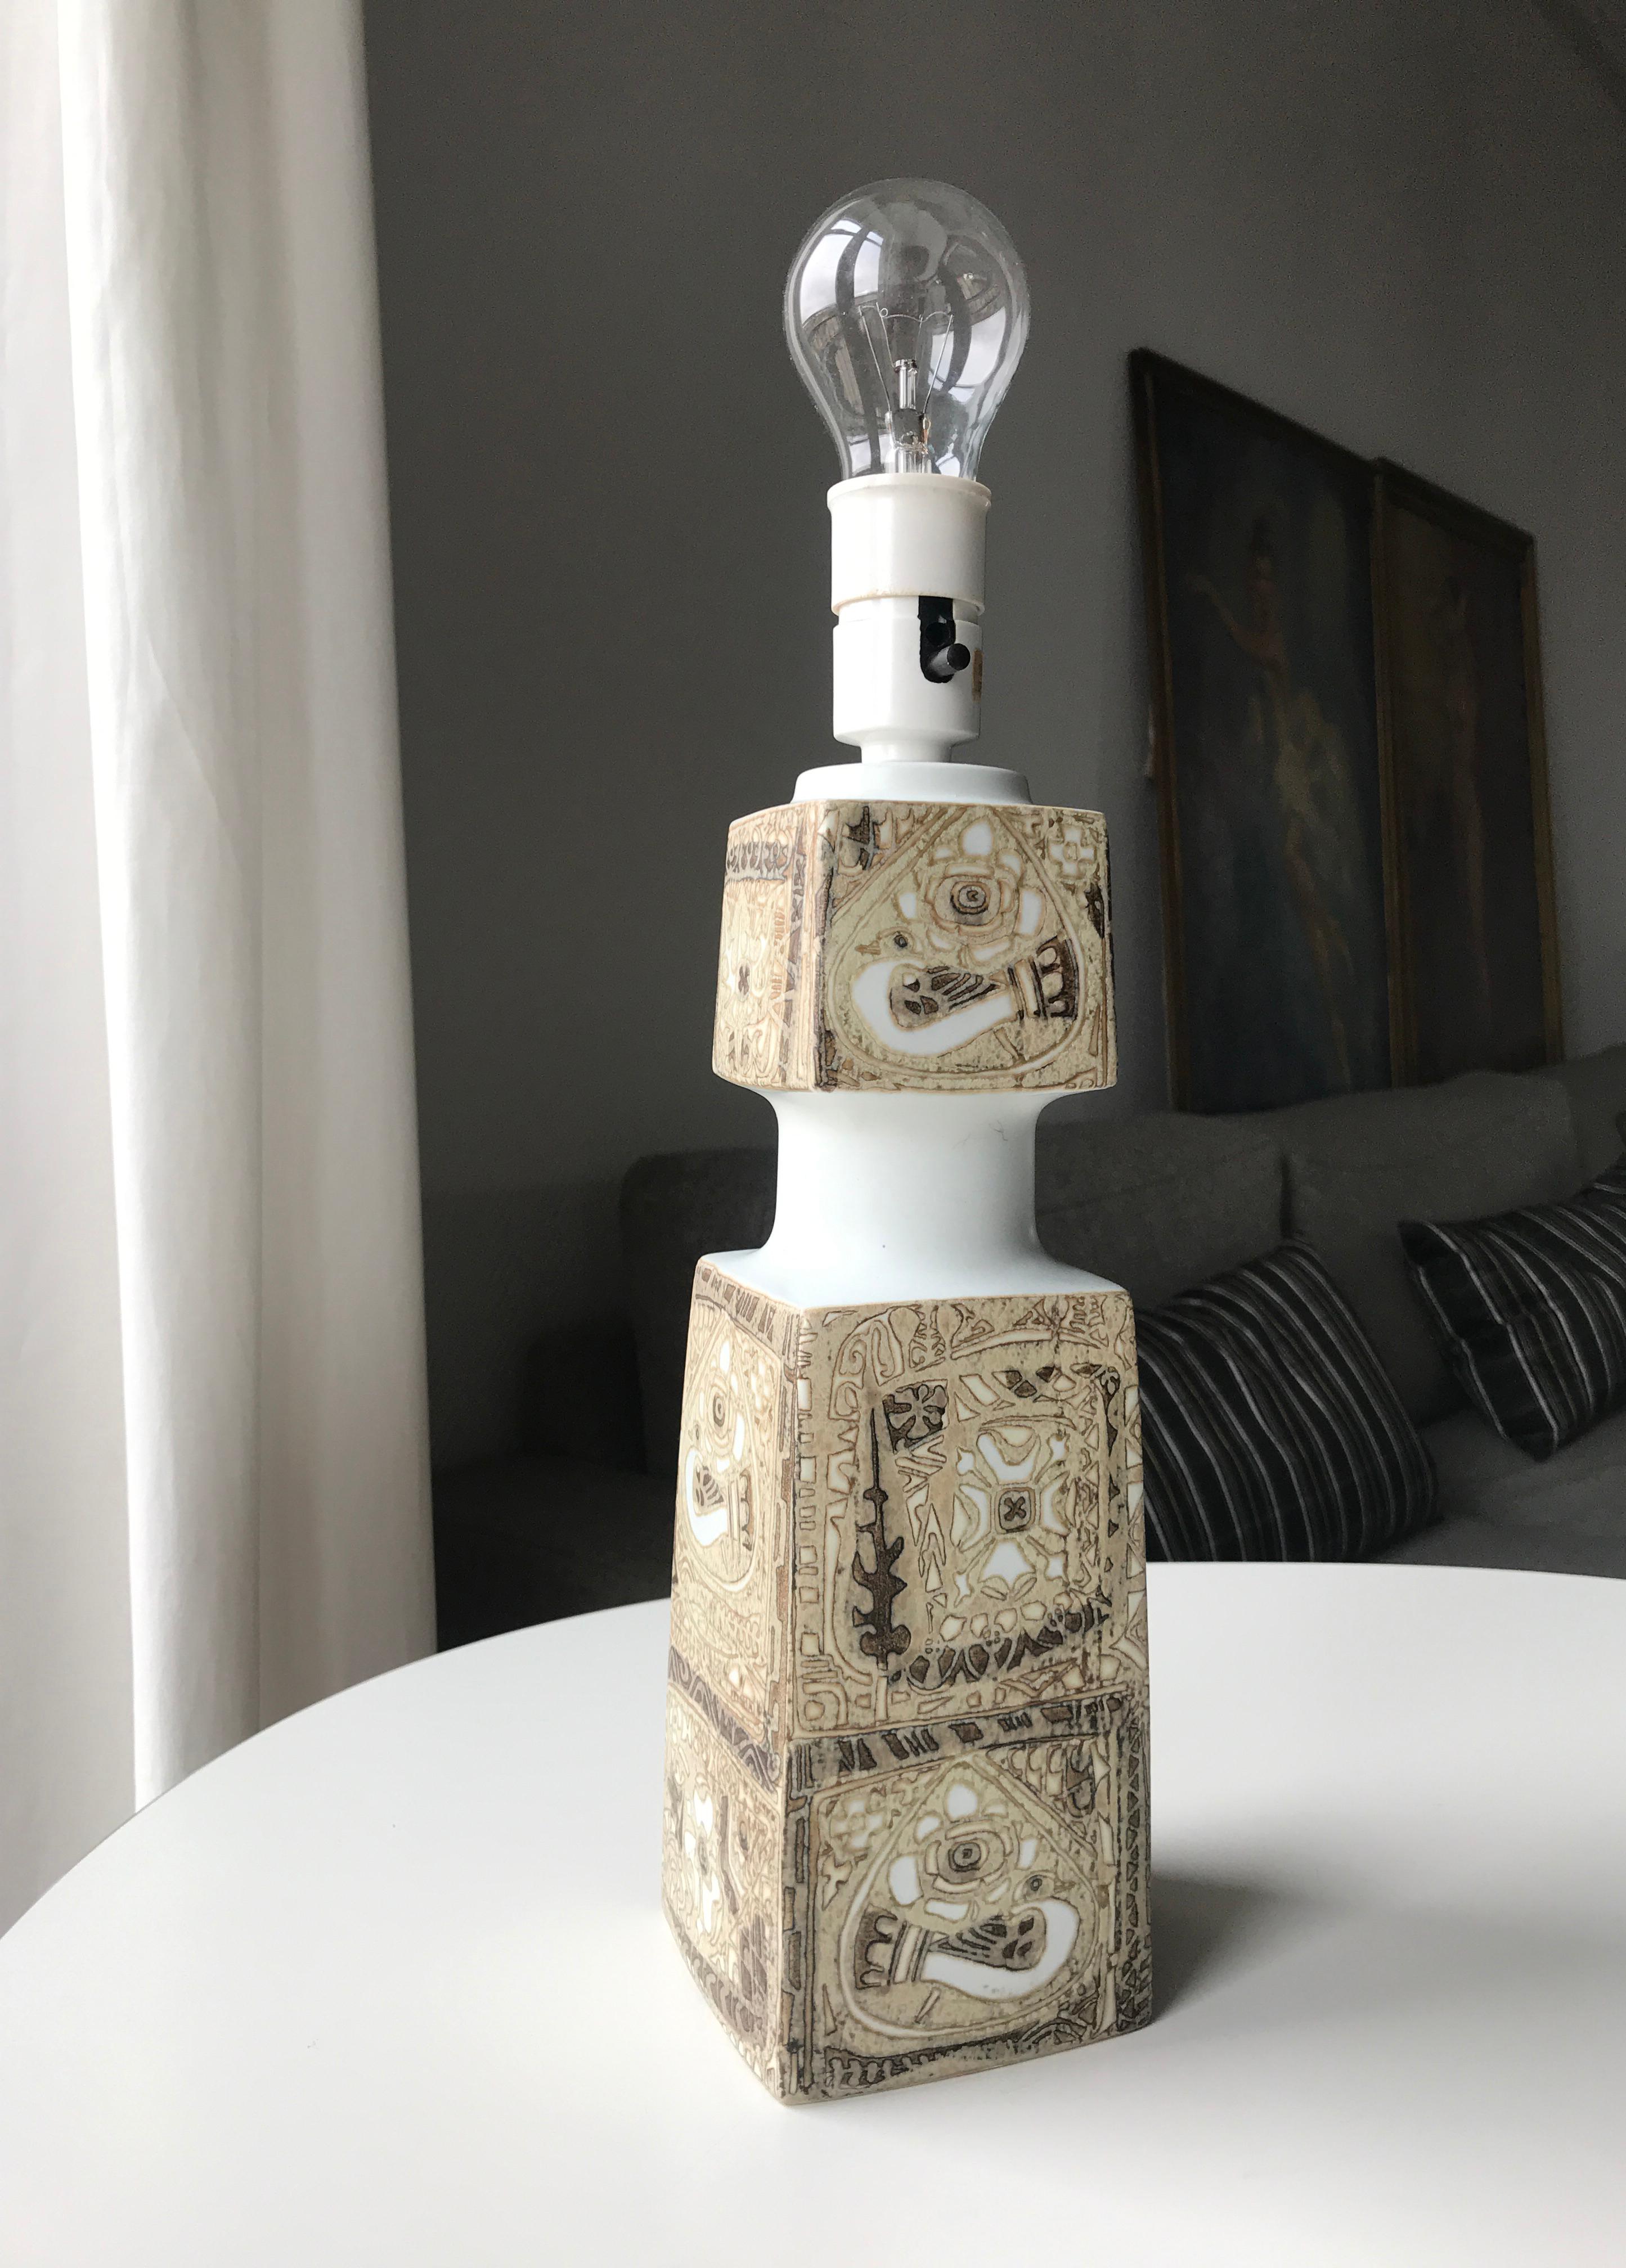 FREE SHIPPING! Baca series grand table lamp designed by Artist Nils Thorsson for Danish Royal Copenhagen Company. The base is made out of stoneware decorated with the typical abstract design from the Baca series with flowers, birds and natural